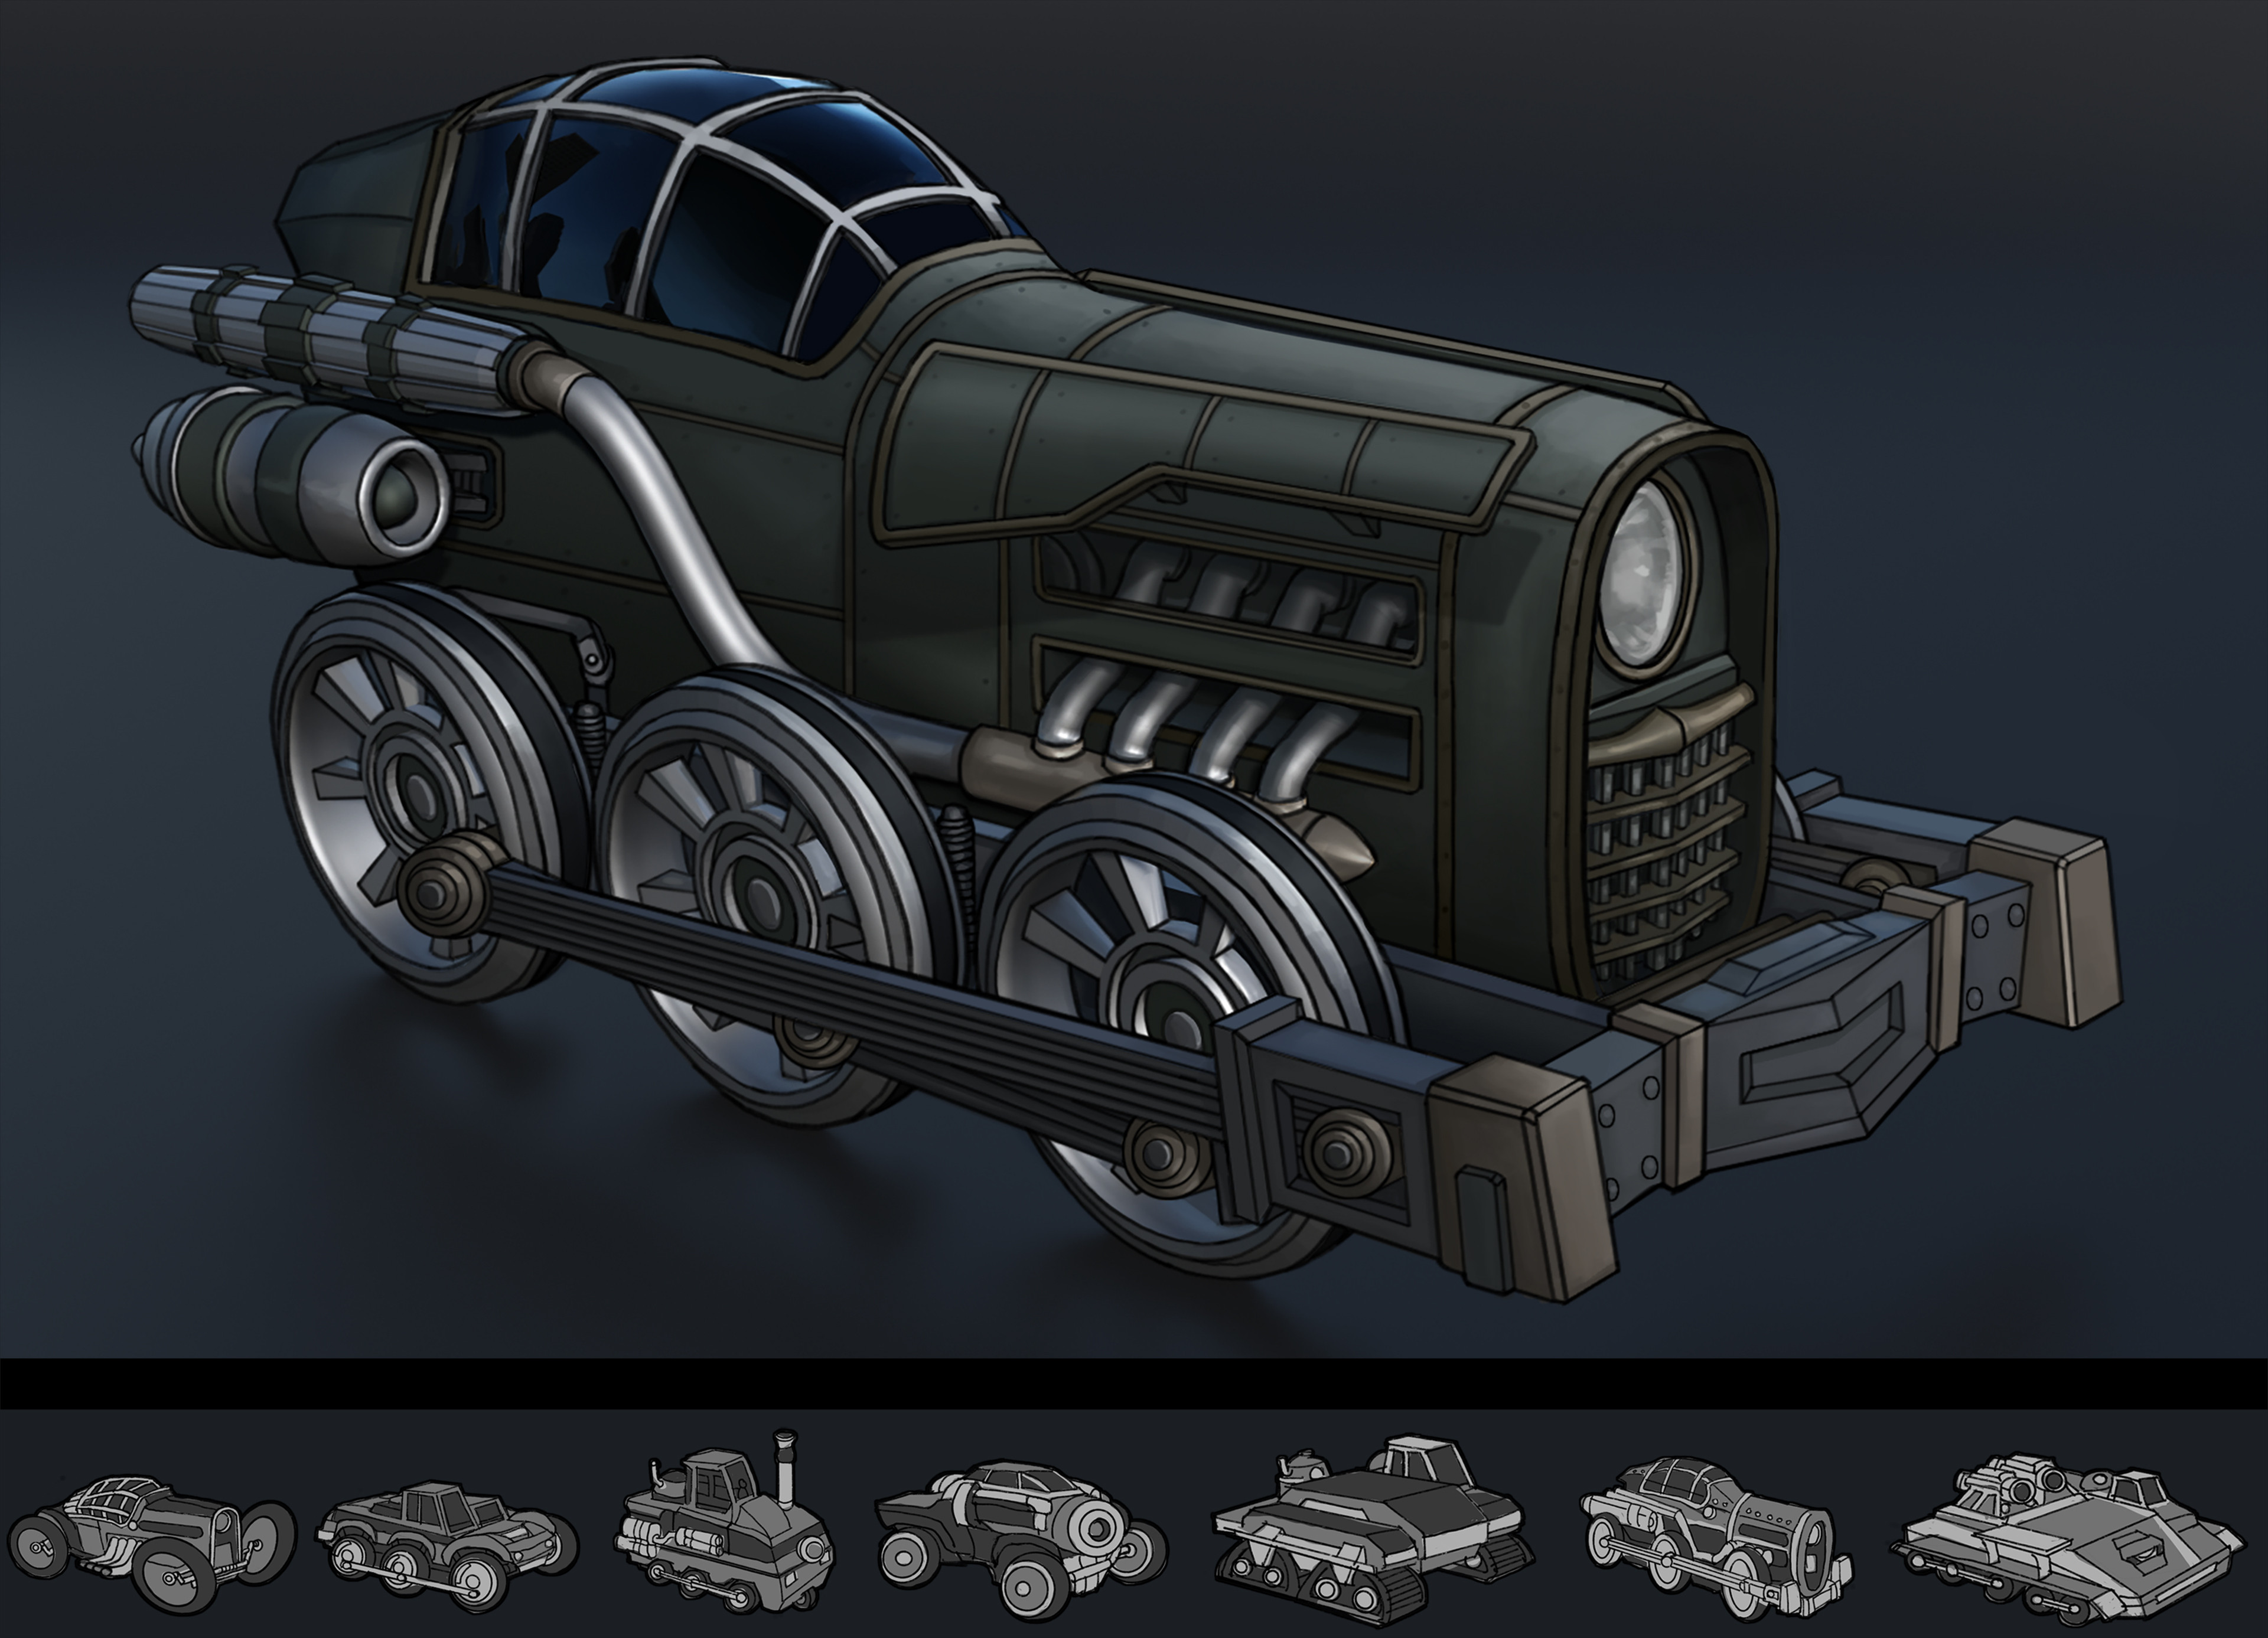 Steampunk hotrod final design and initial thumbs to find the design of the vehicle